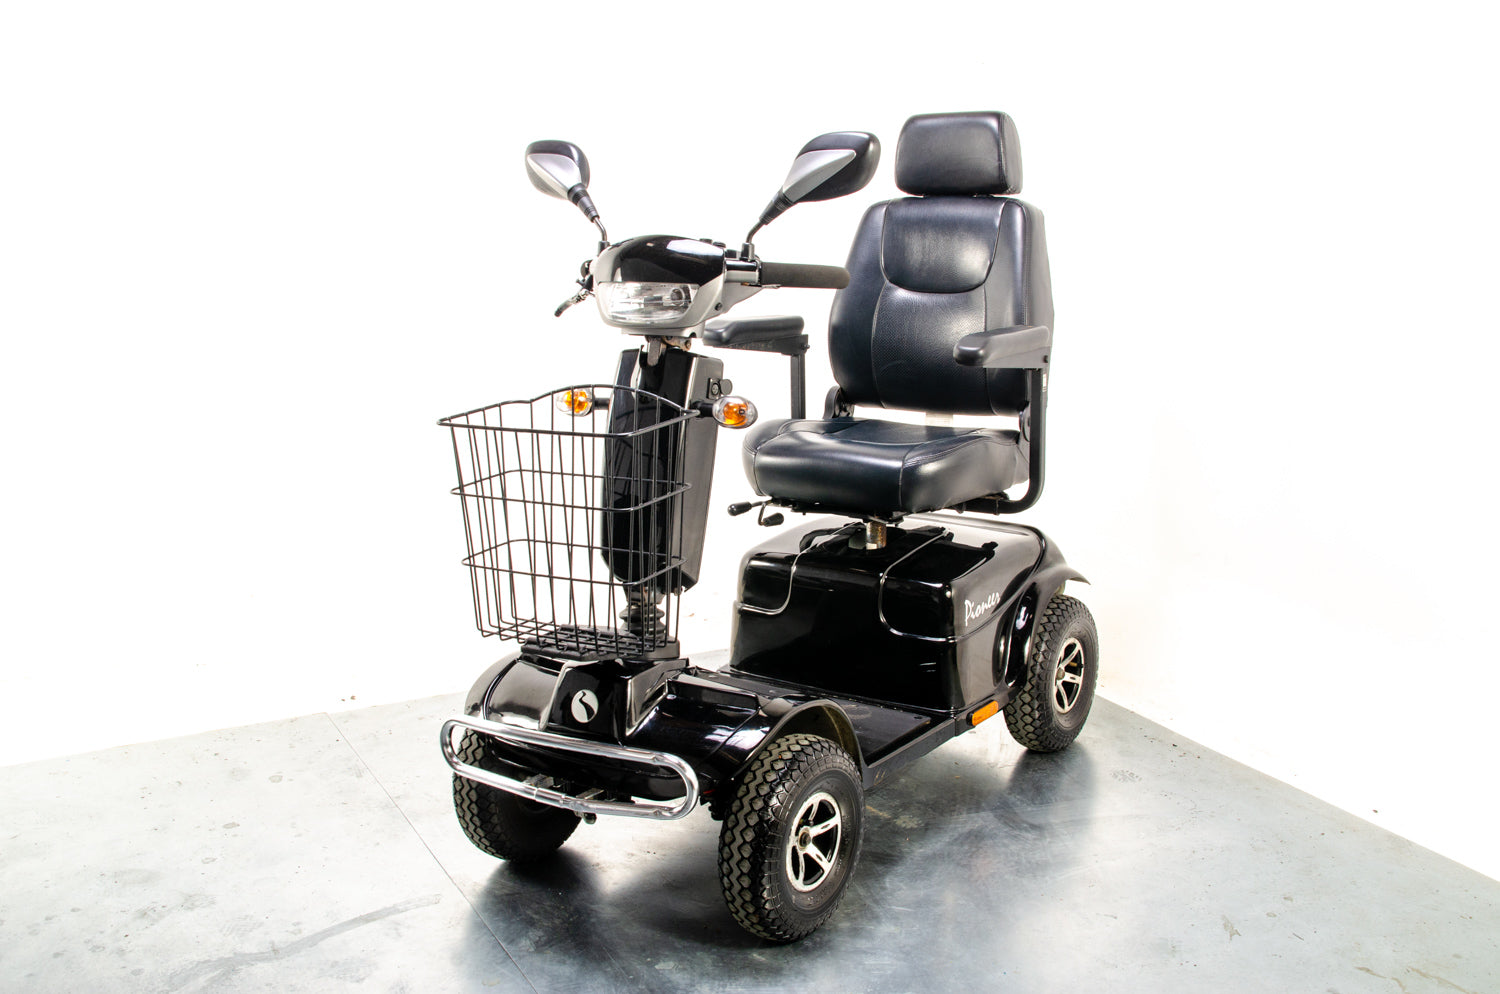 Rascal Pioneer Used Electric Mobility Scooter 8mph All-Terrain Suspension Off-Road Black 03547